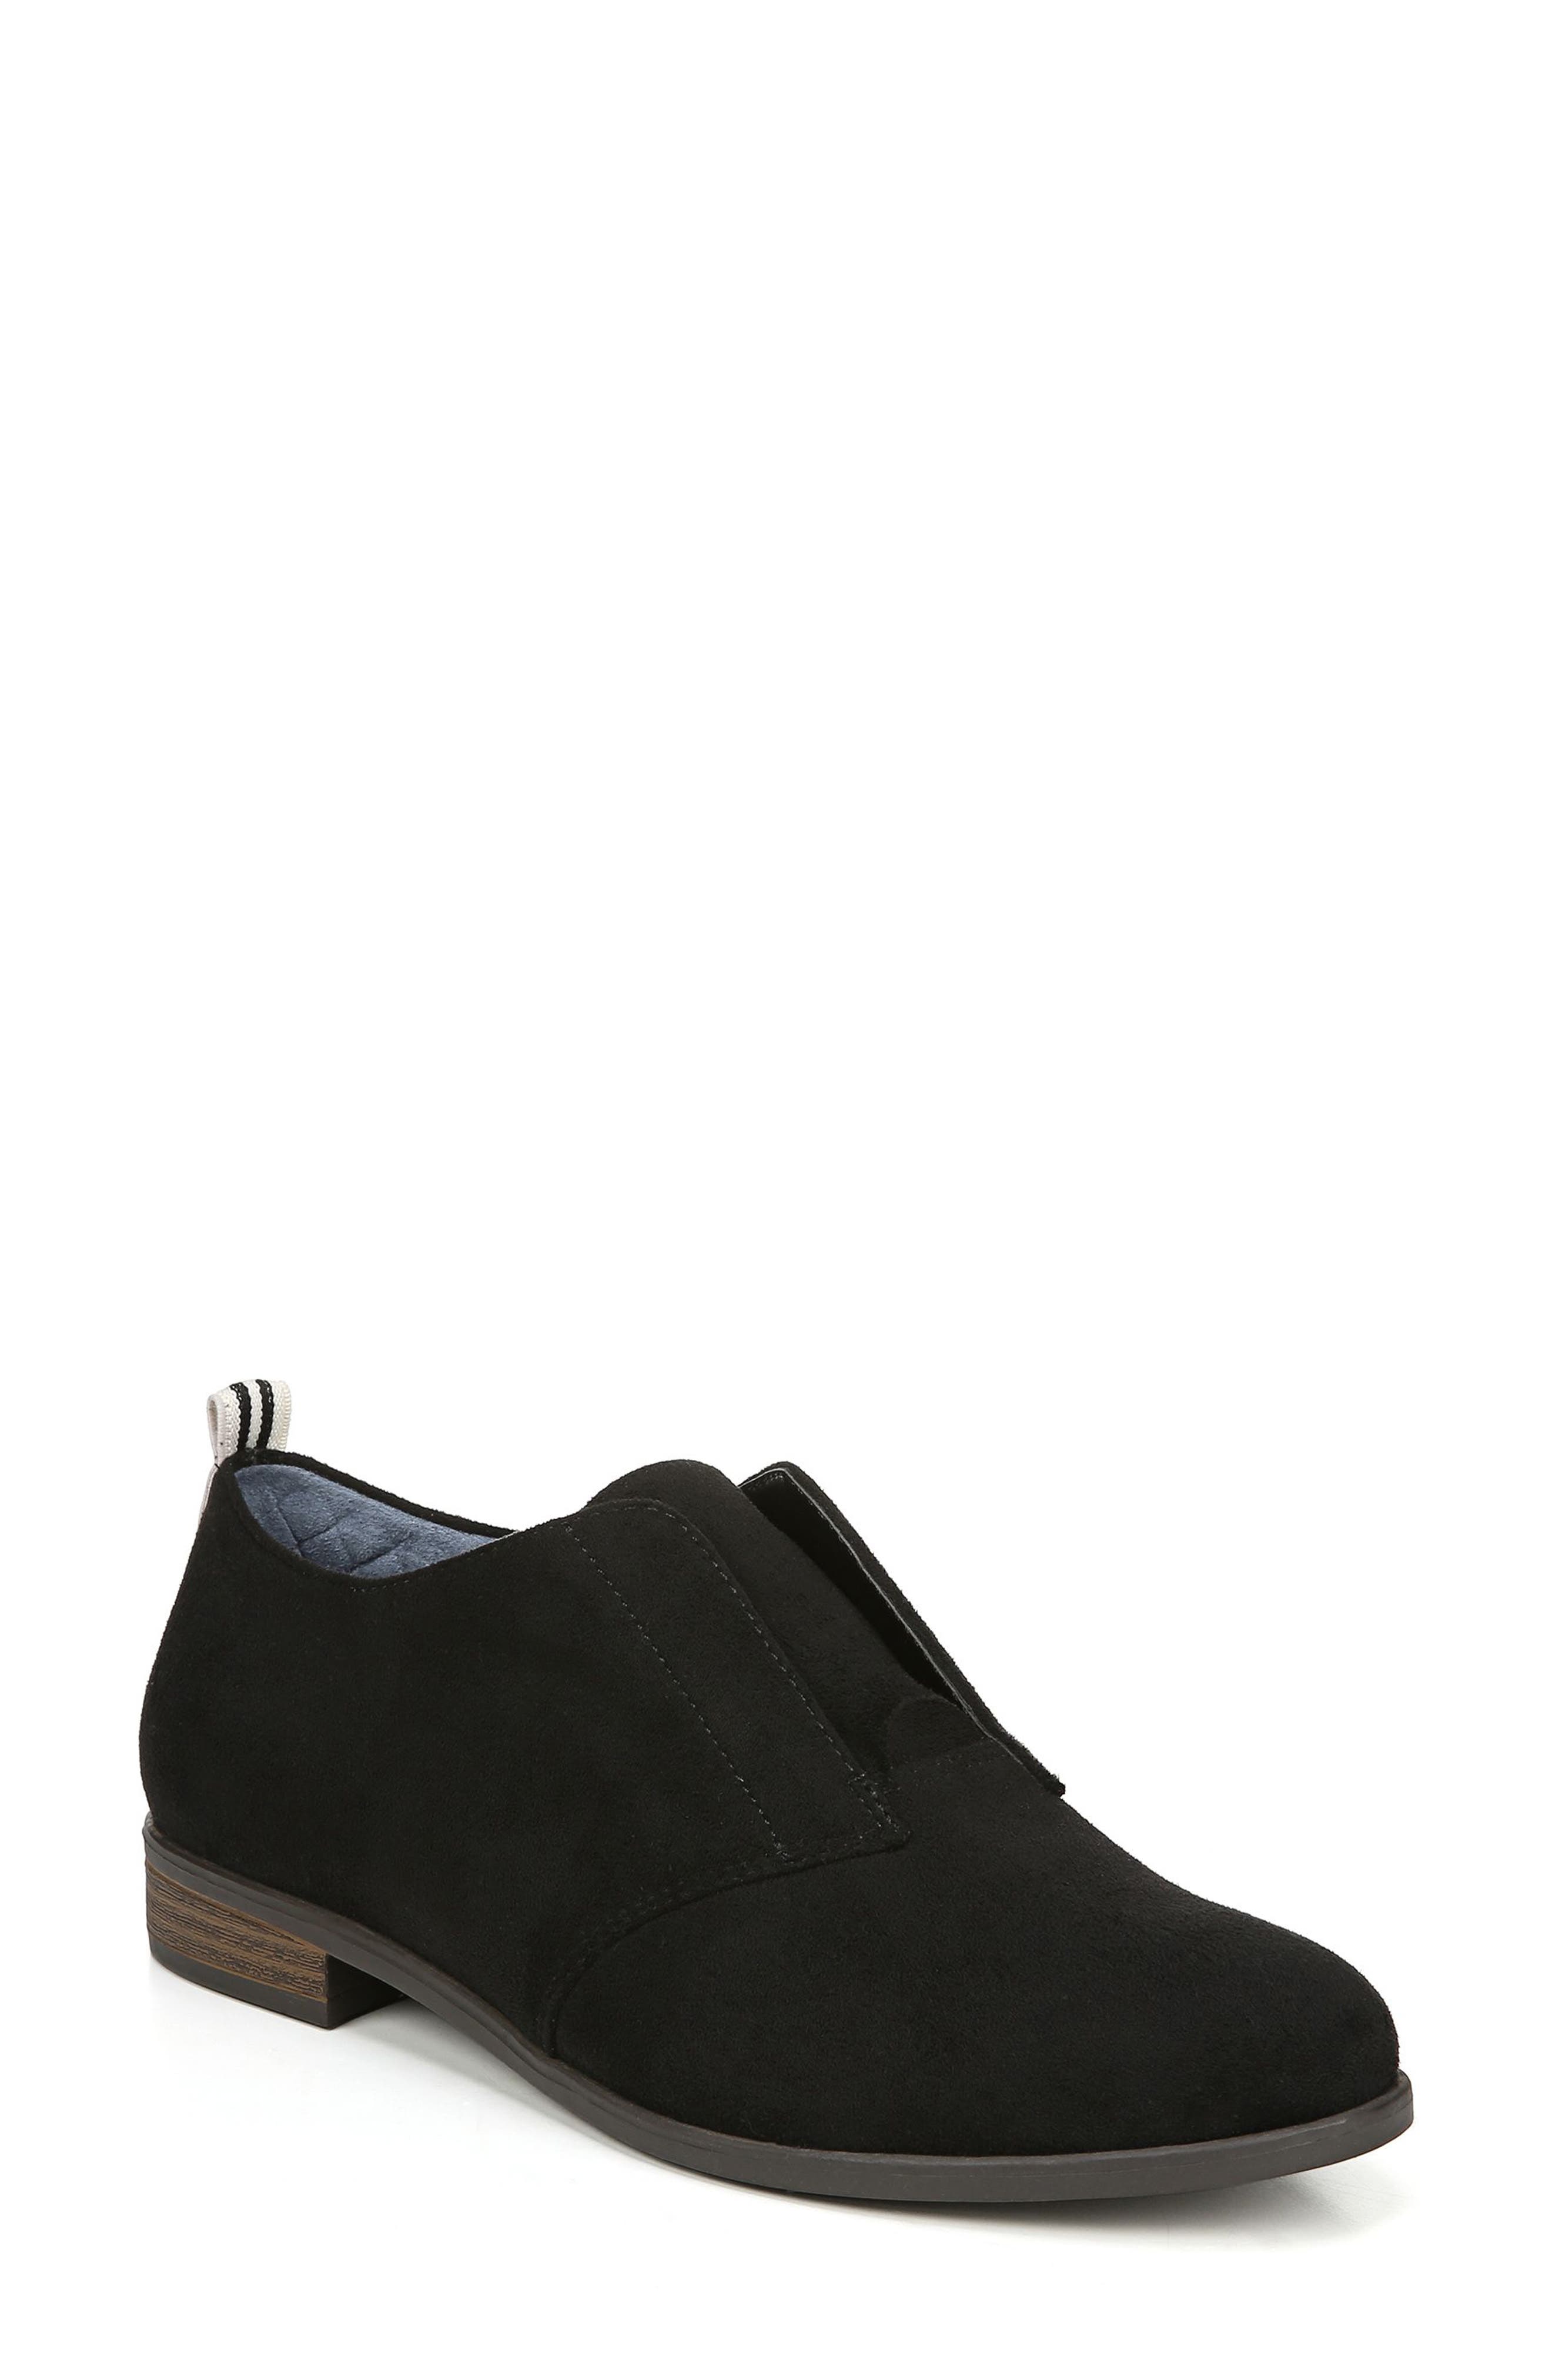 UPC 736705464136 product image for Women's Dr. Scholl's Rialta Slip-On Oxford, Size 7 M - Black | upcitemdb.com